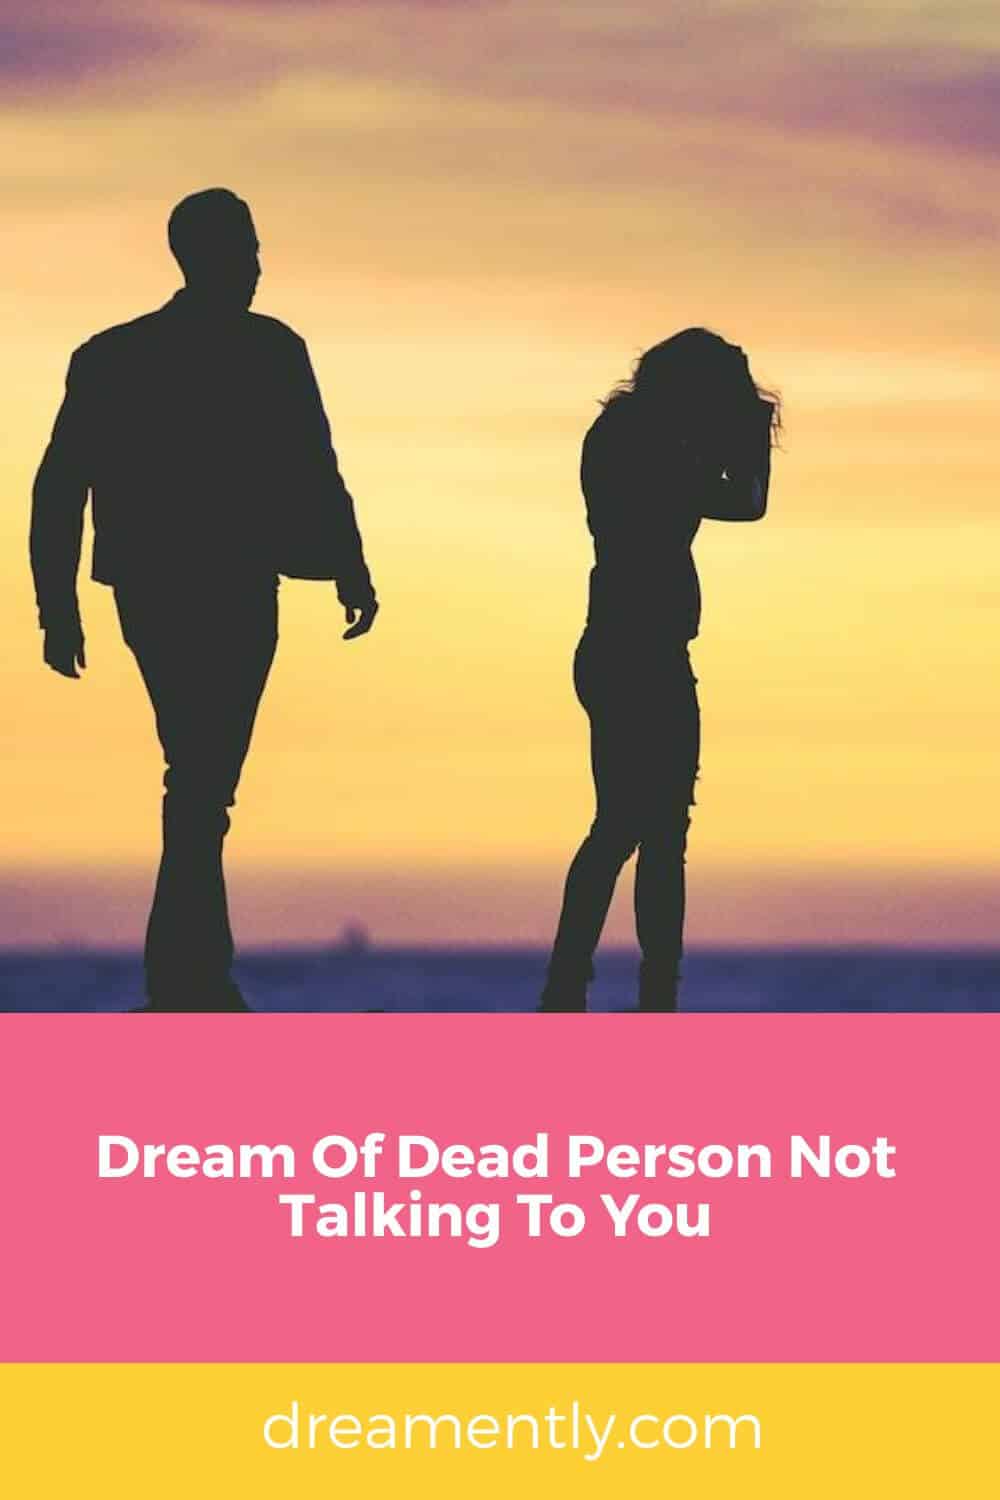 Dream Of Dead Person Not Talking To You (2)